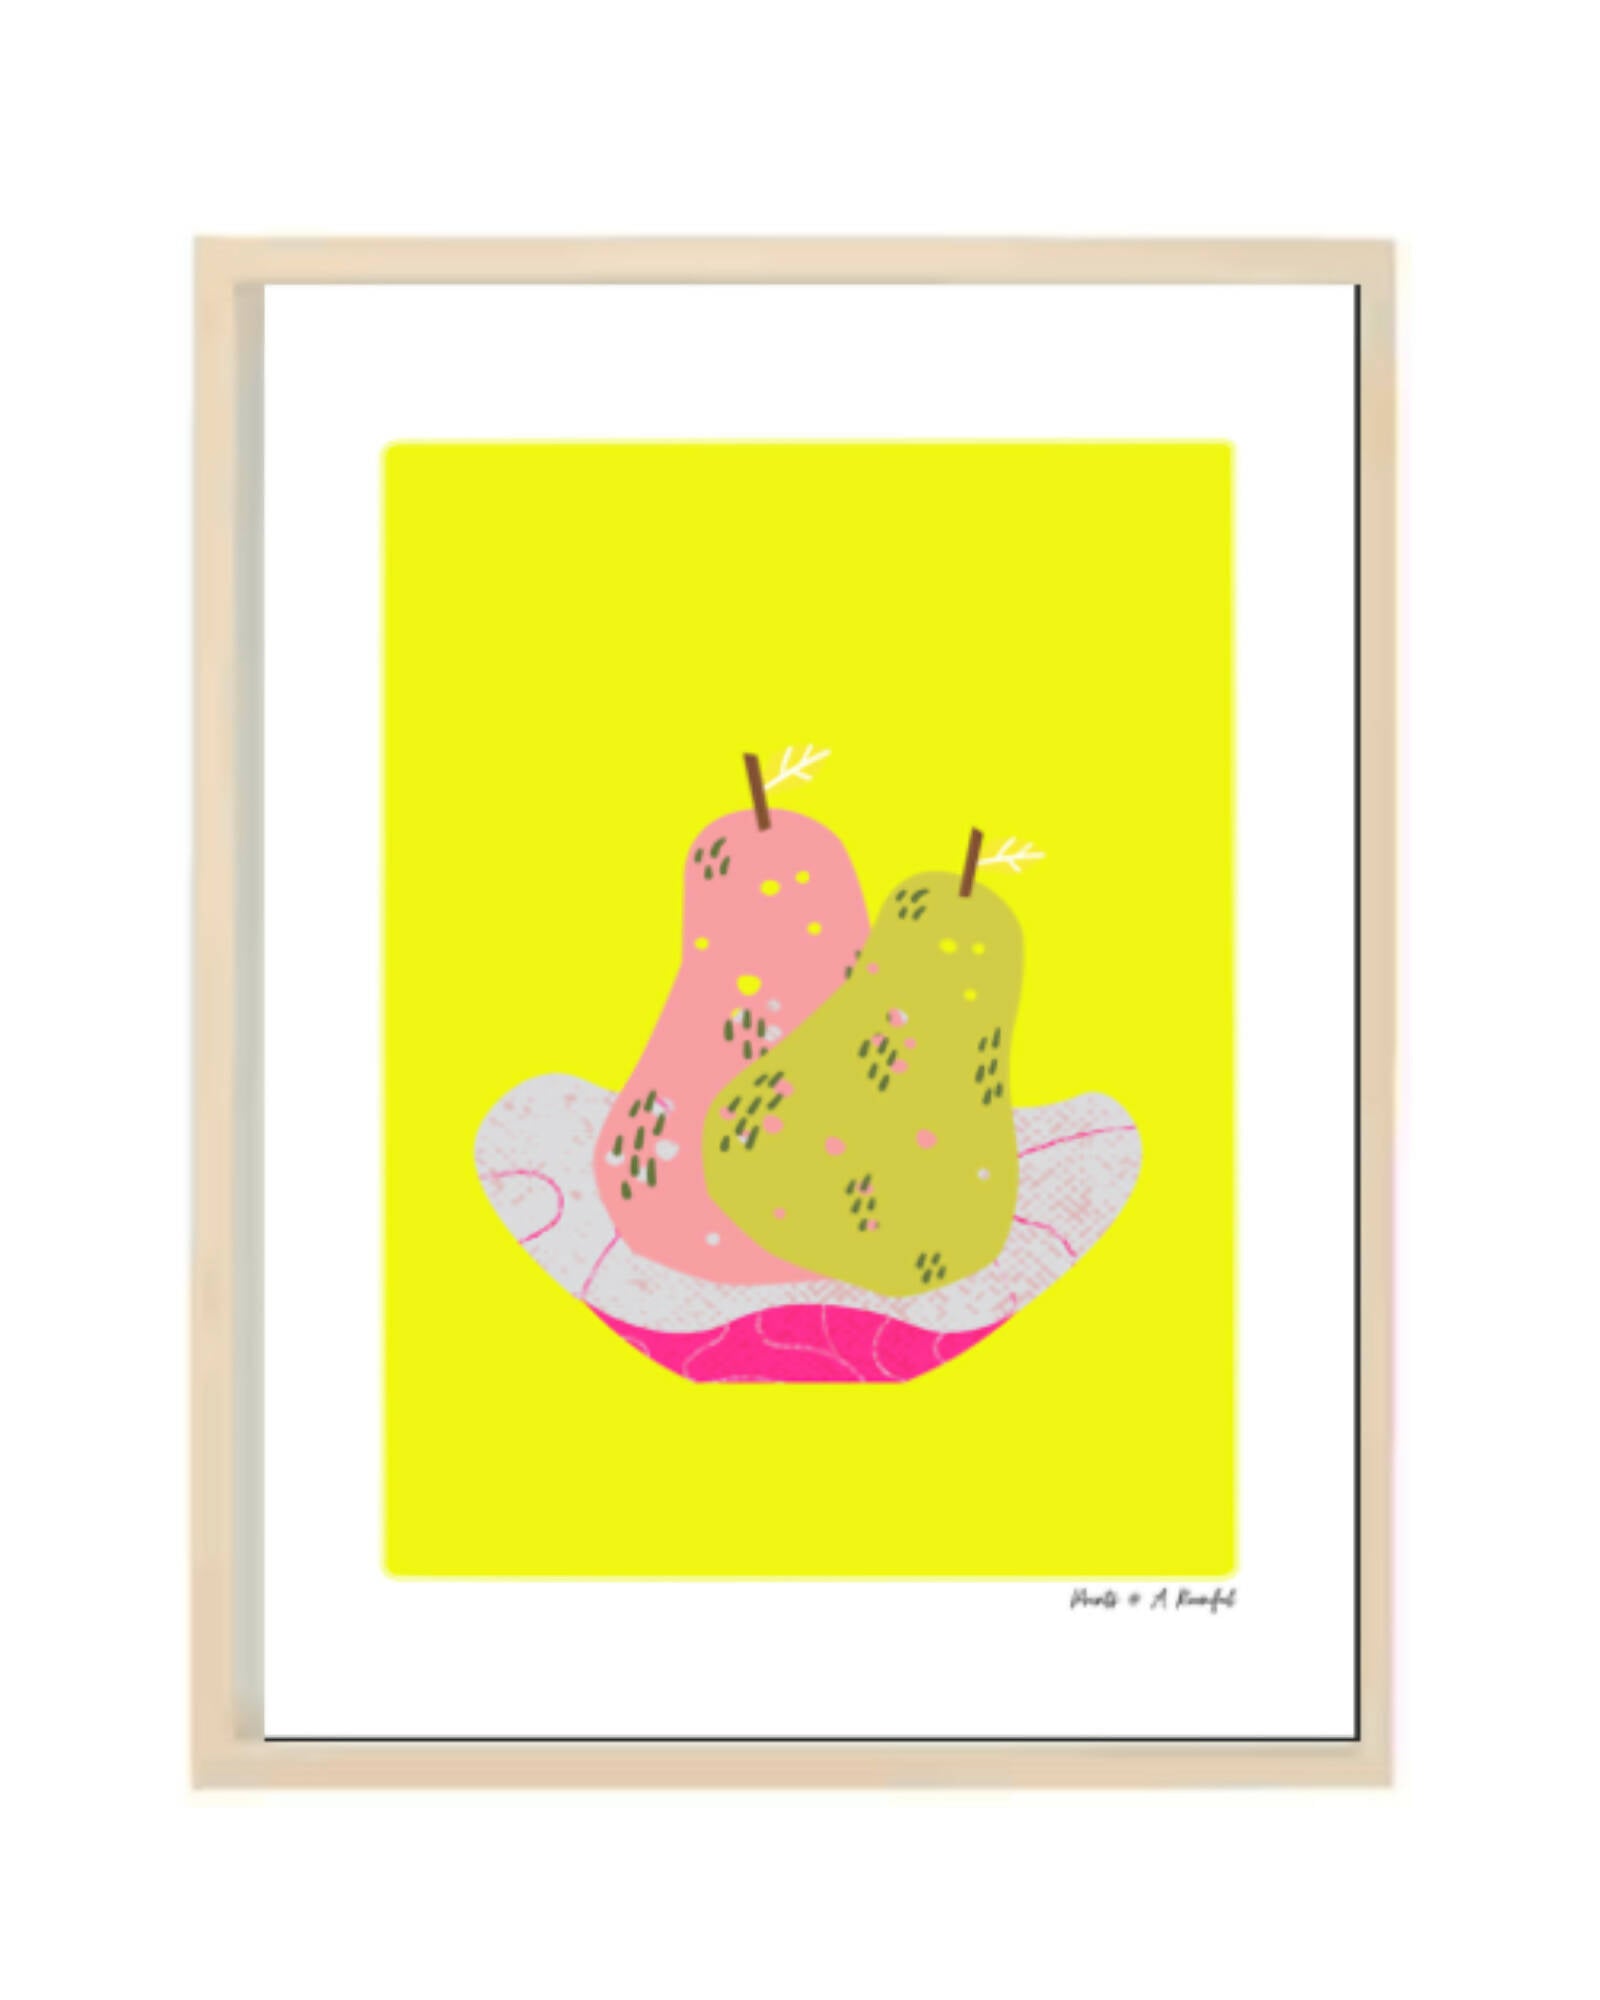 wall art : inspired by colours and fruits (pears) Art Prints@ARoomful 40cm x 50cm 